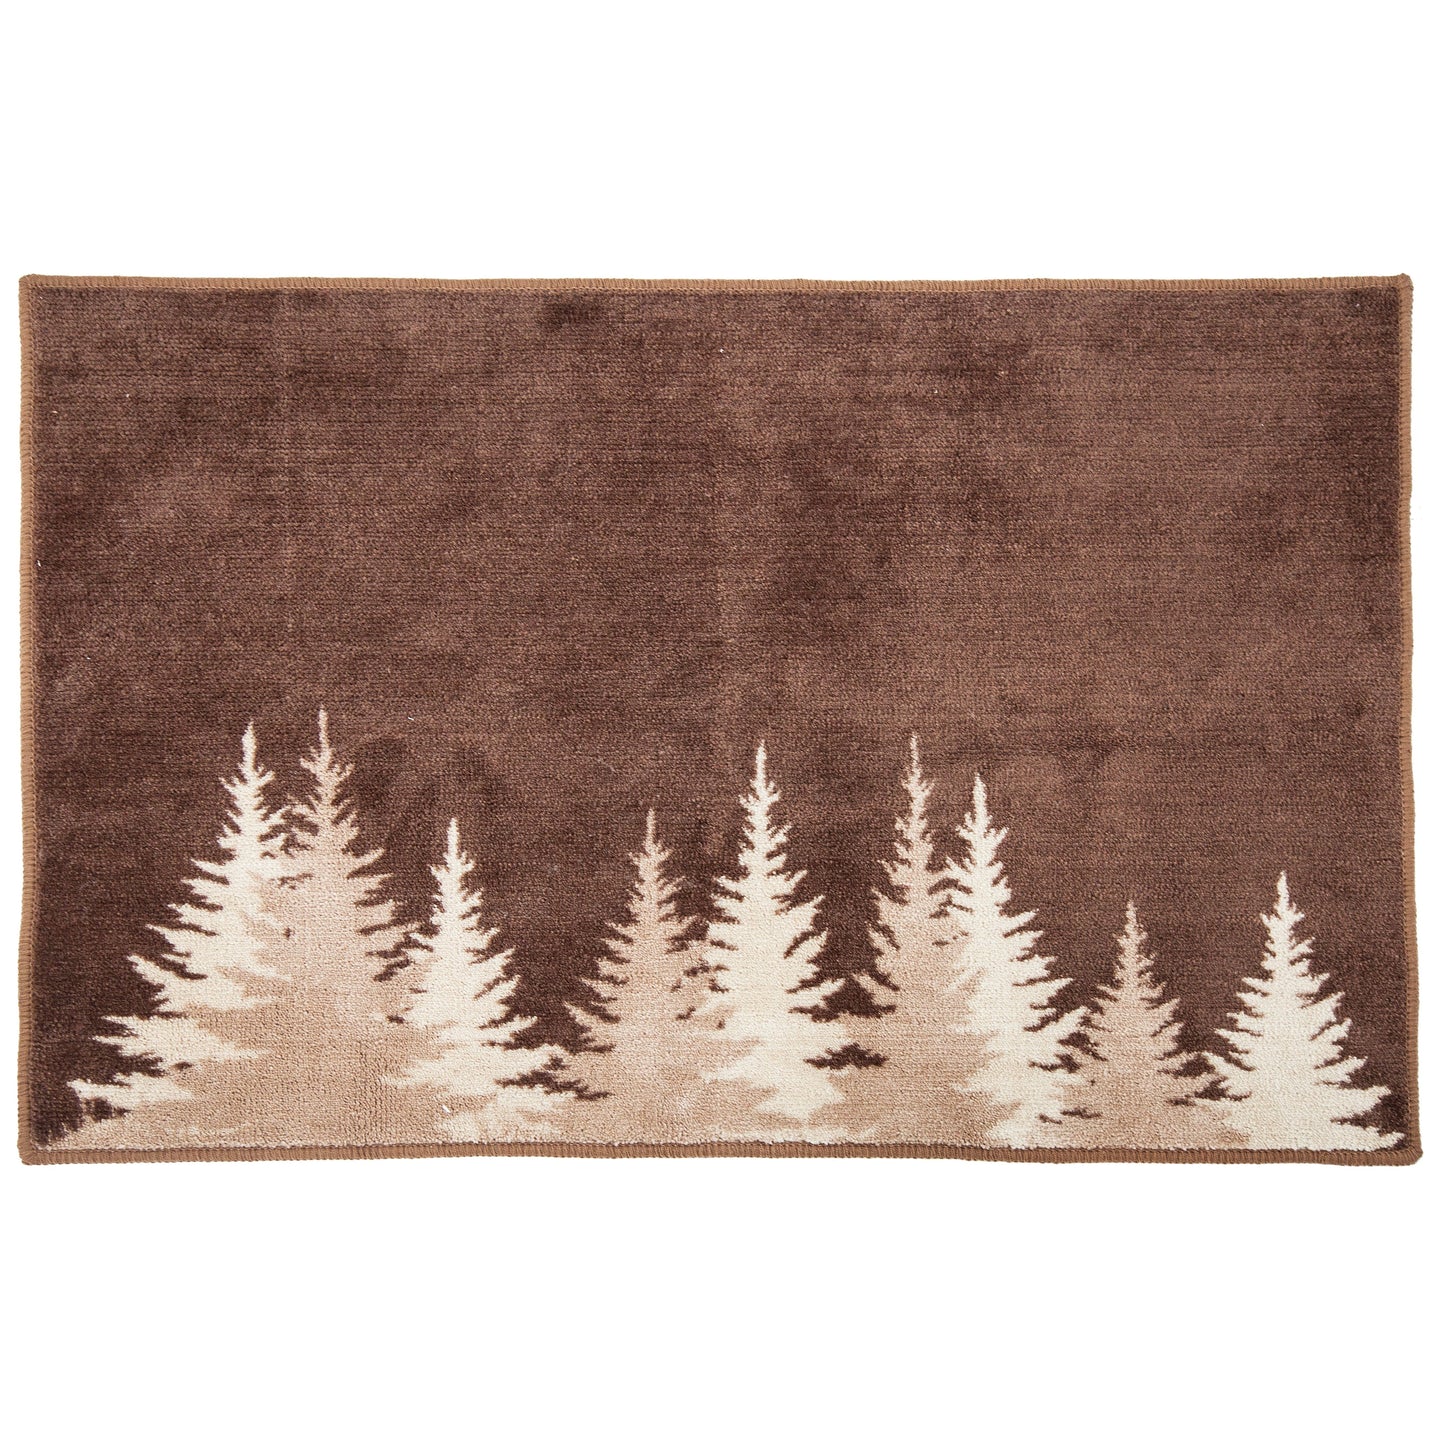 Clearwater Pines Bath Rug